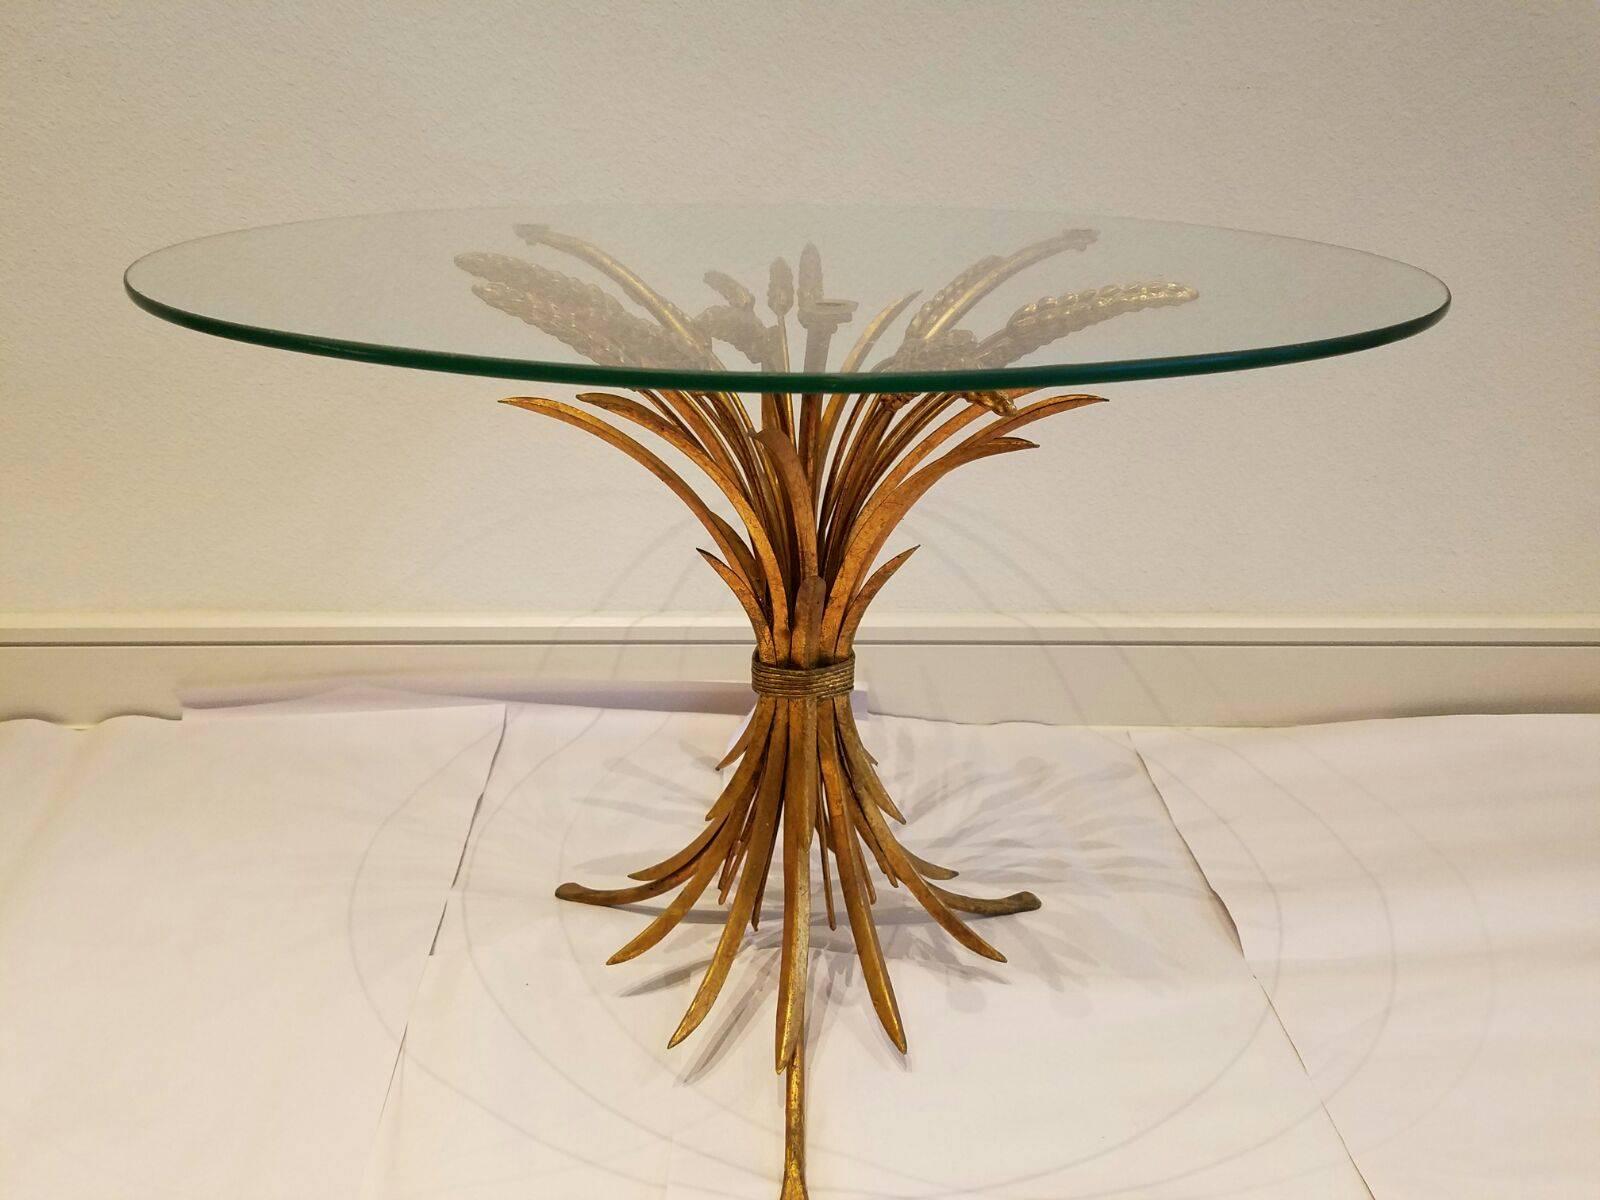  Beautiful Hollywood Regency gilded wheat sheaf accent table with glass top. Made in Italy in the 1960's. Lovely accent table..